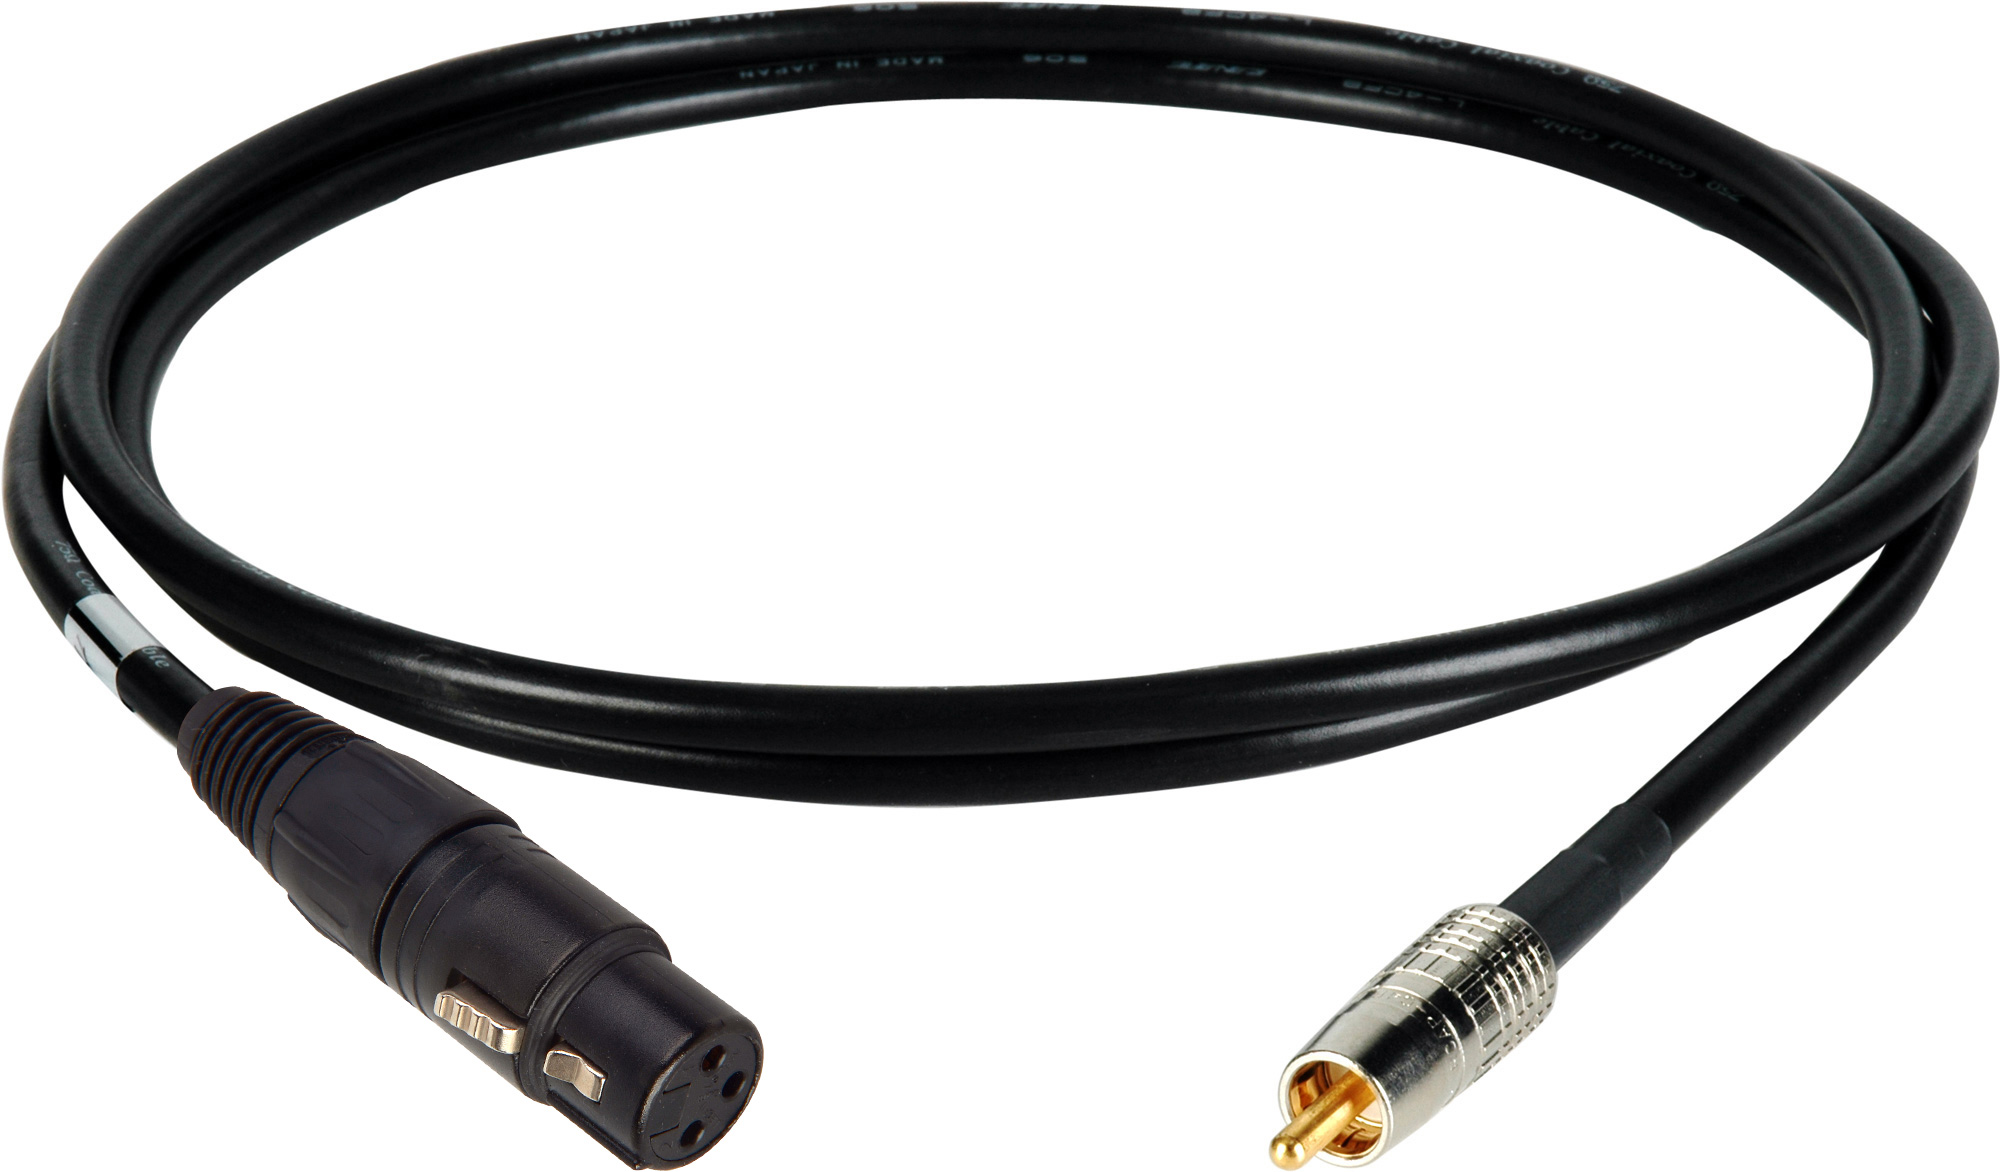 Aes Spdif Xlf To Rca Digital Audio Cable 6ft 7258